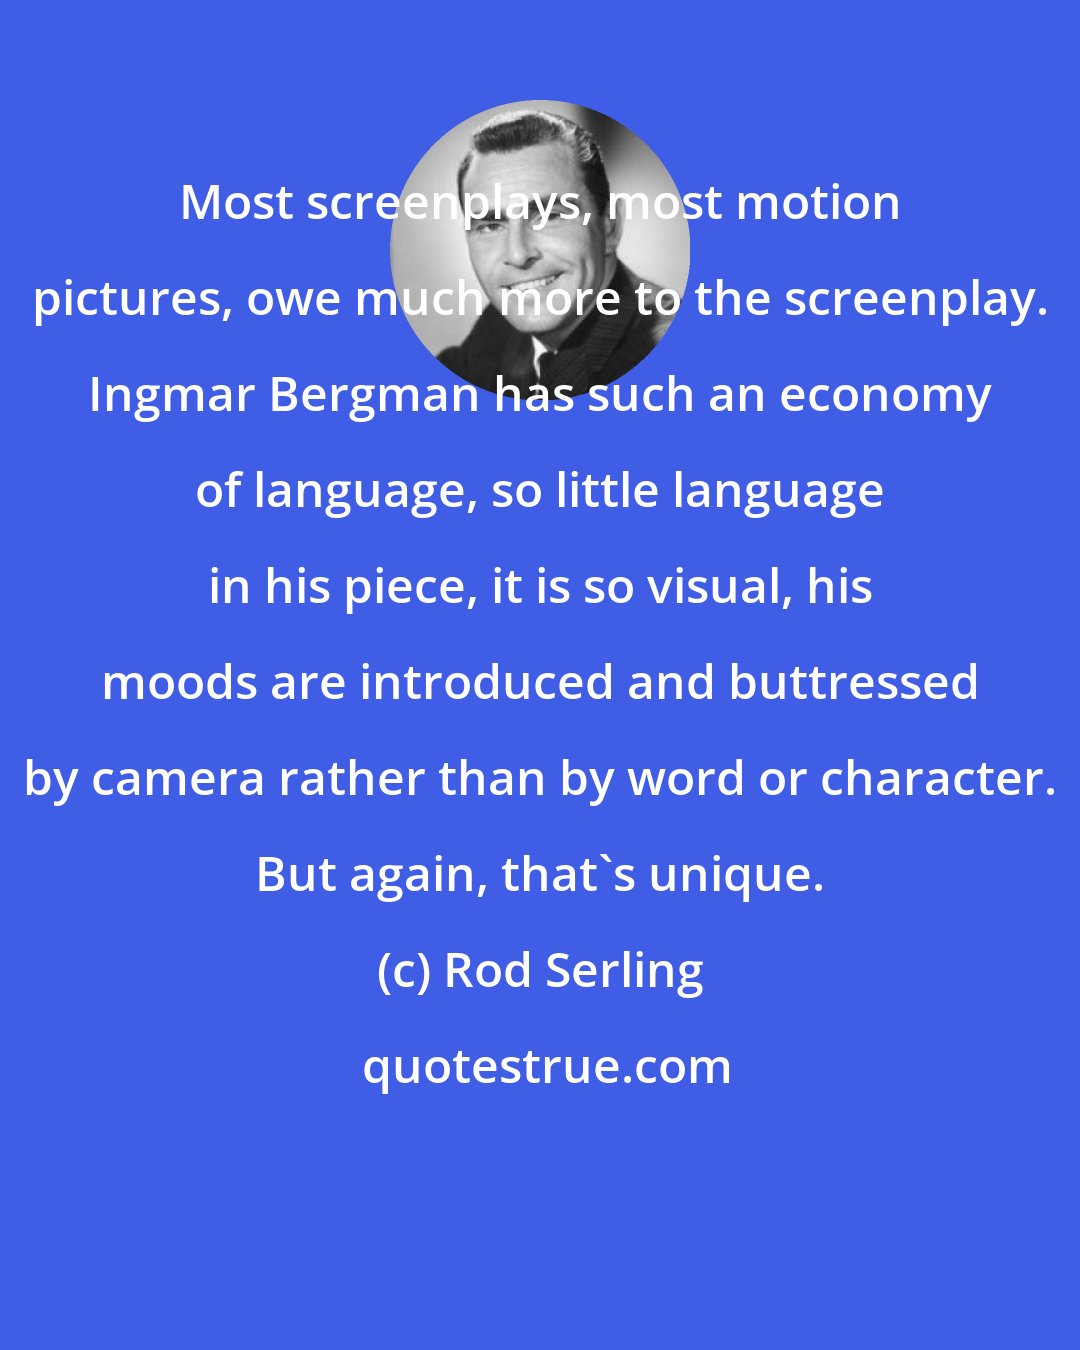 Rod Serling: Most screenplays, most motion pictures, owe much more to the screenplay. Ingmar Bergman has such an economy of language, so little language in his piece, it is so visual, his moods are introduced and buttressed by camera rather than by word or character. But again, that's unique.